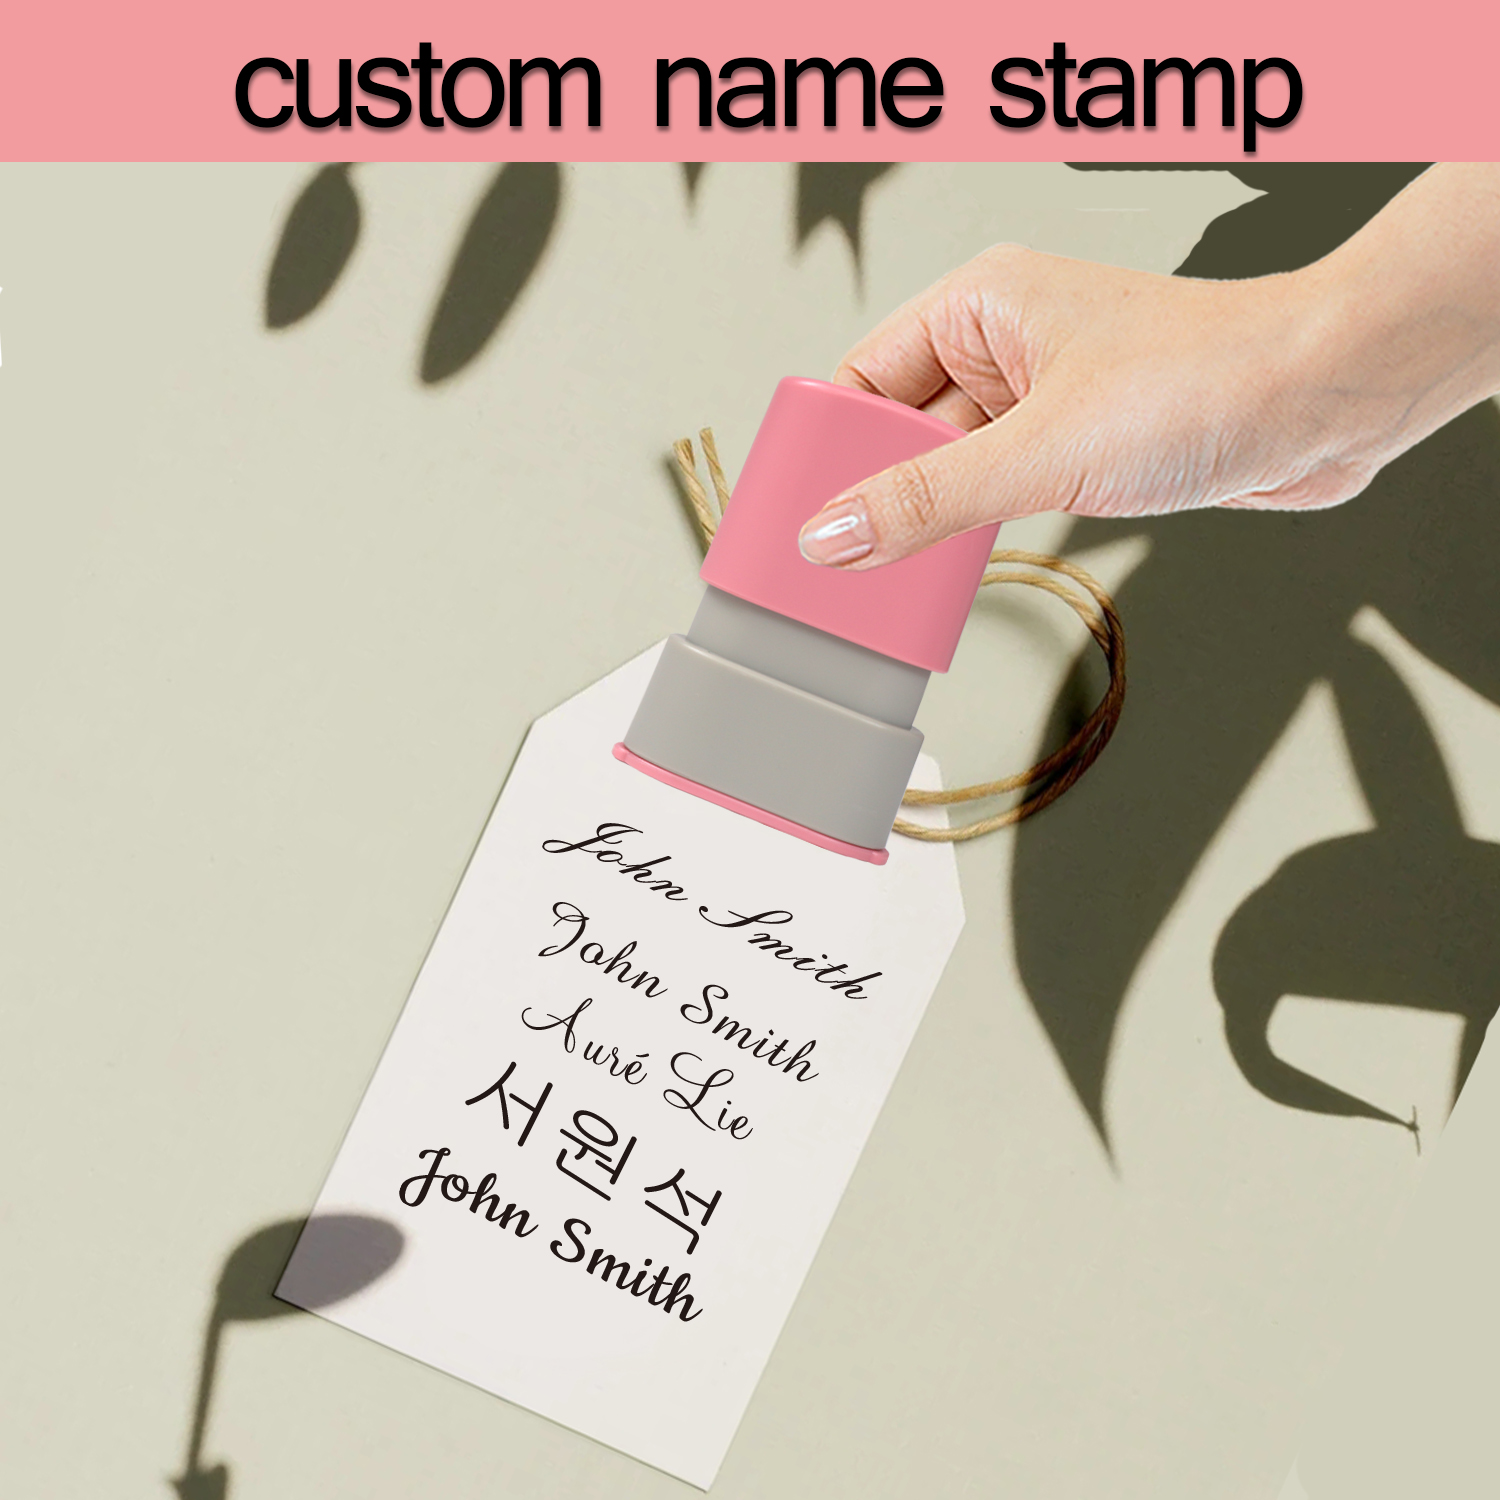 Signature Stamp - Stamp with Name - 1 Line Name Stamp Signature Stamp -  Customizable Stamp - Personalized Self-Inking Signature Stamps